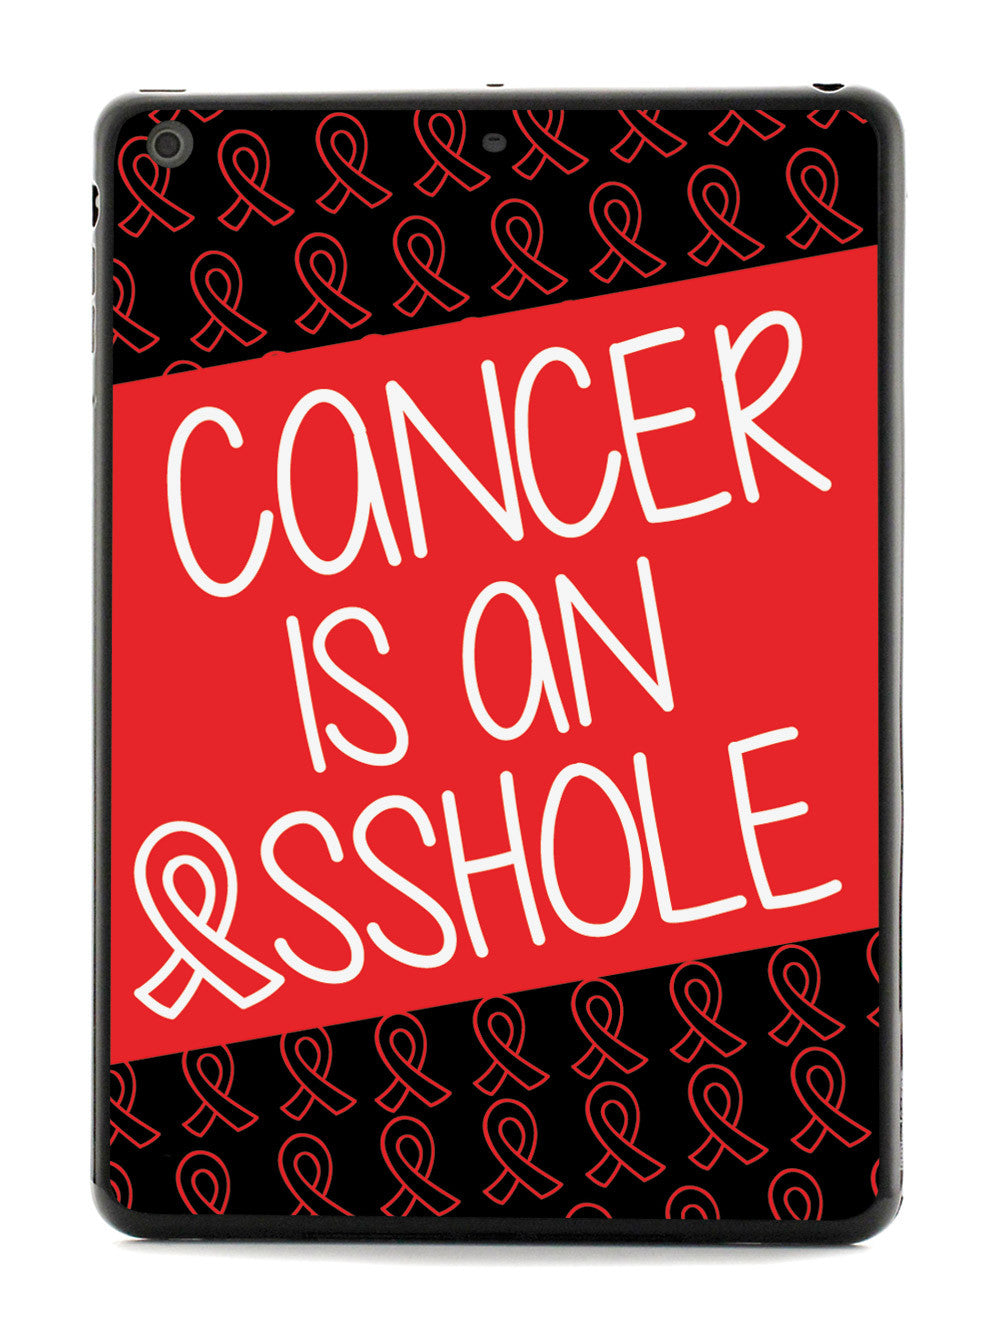 Cancer is an ASSHOLE Red Case